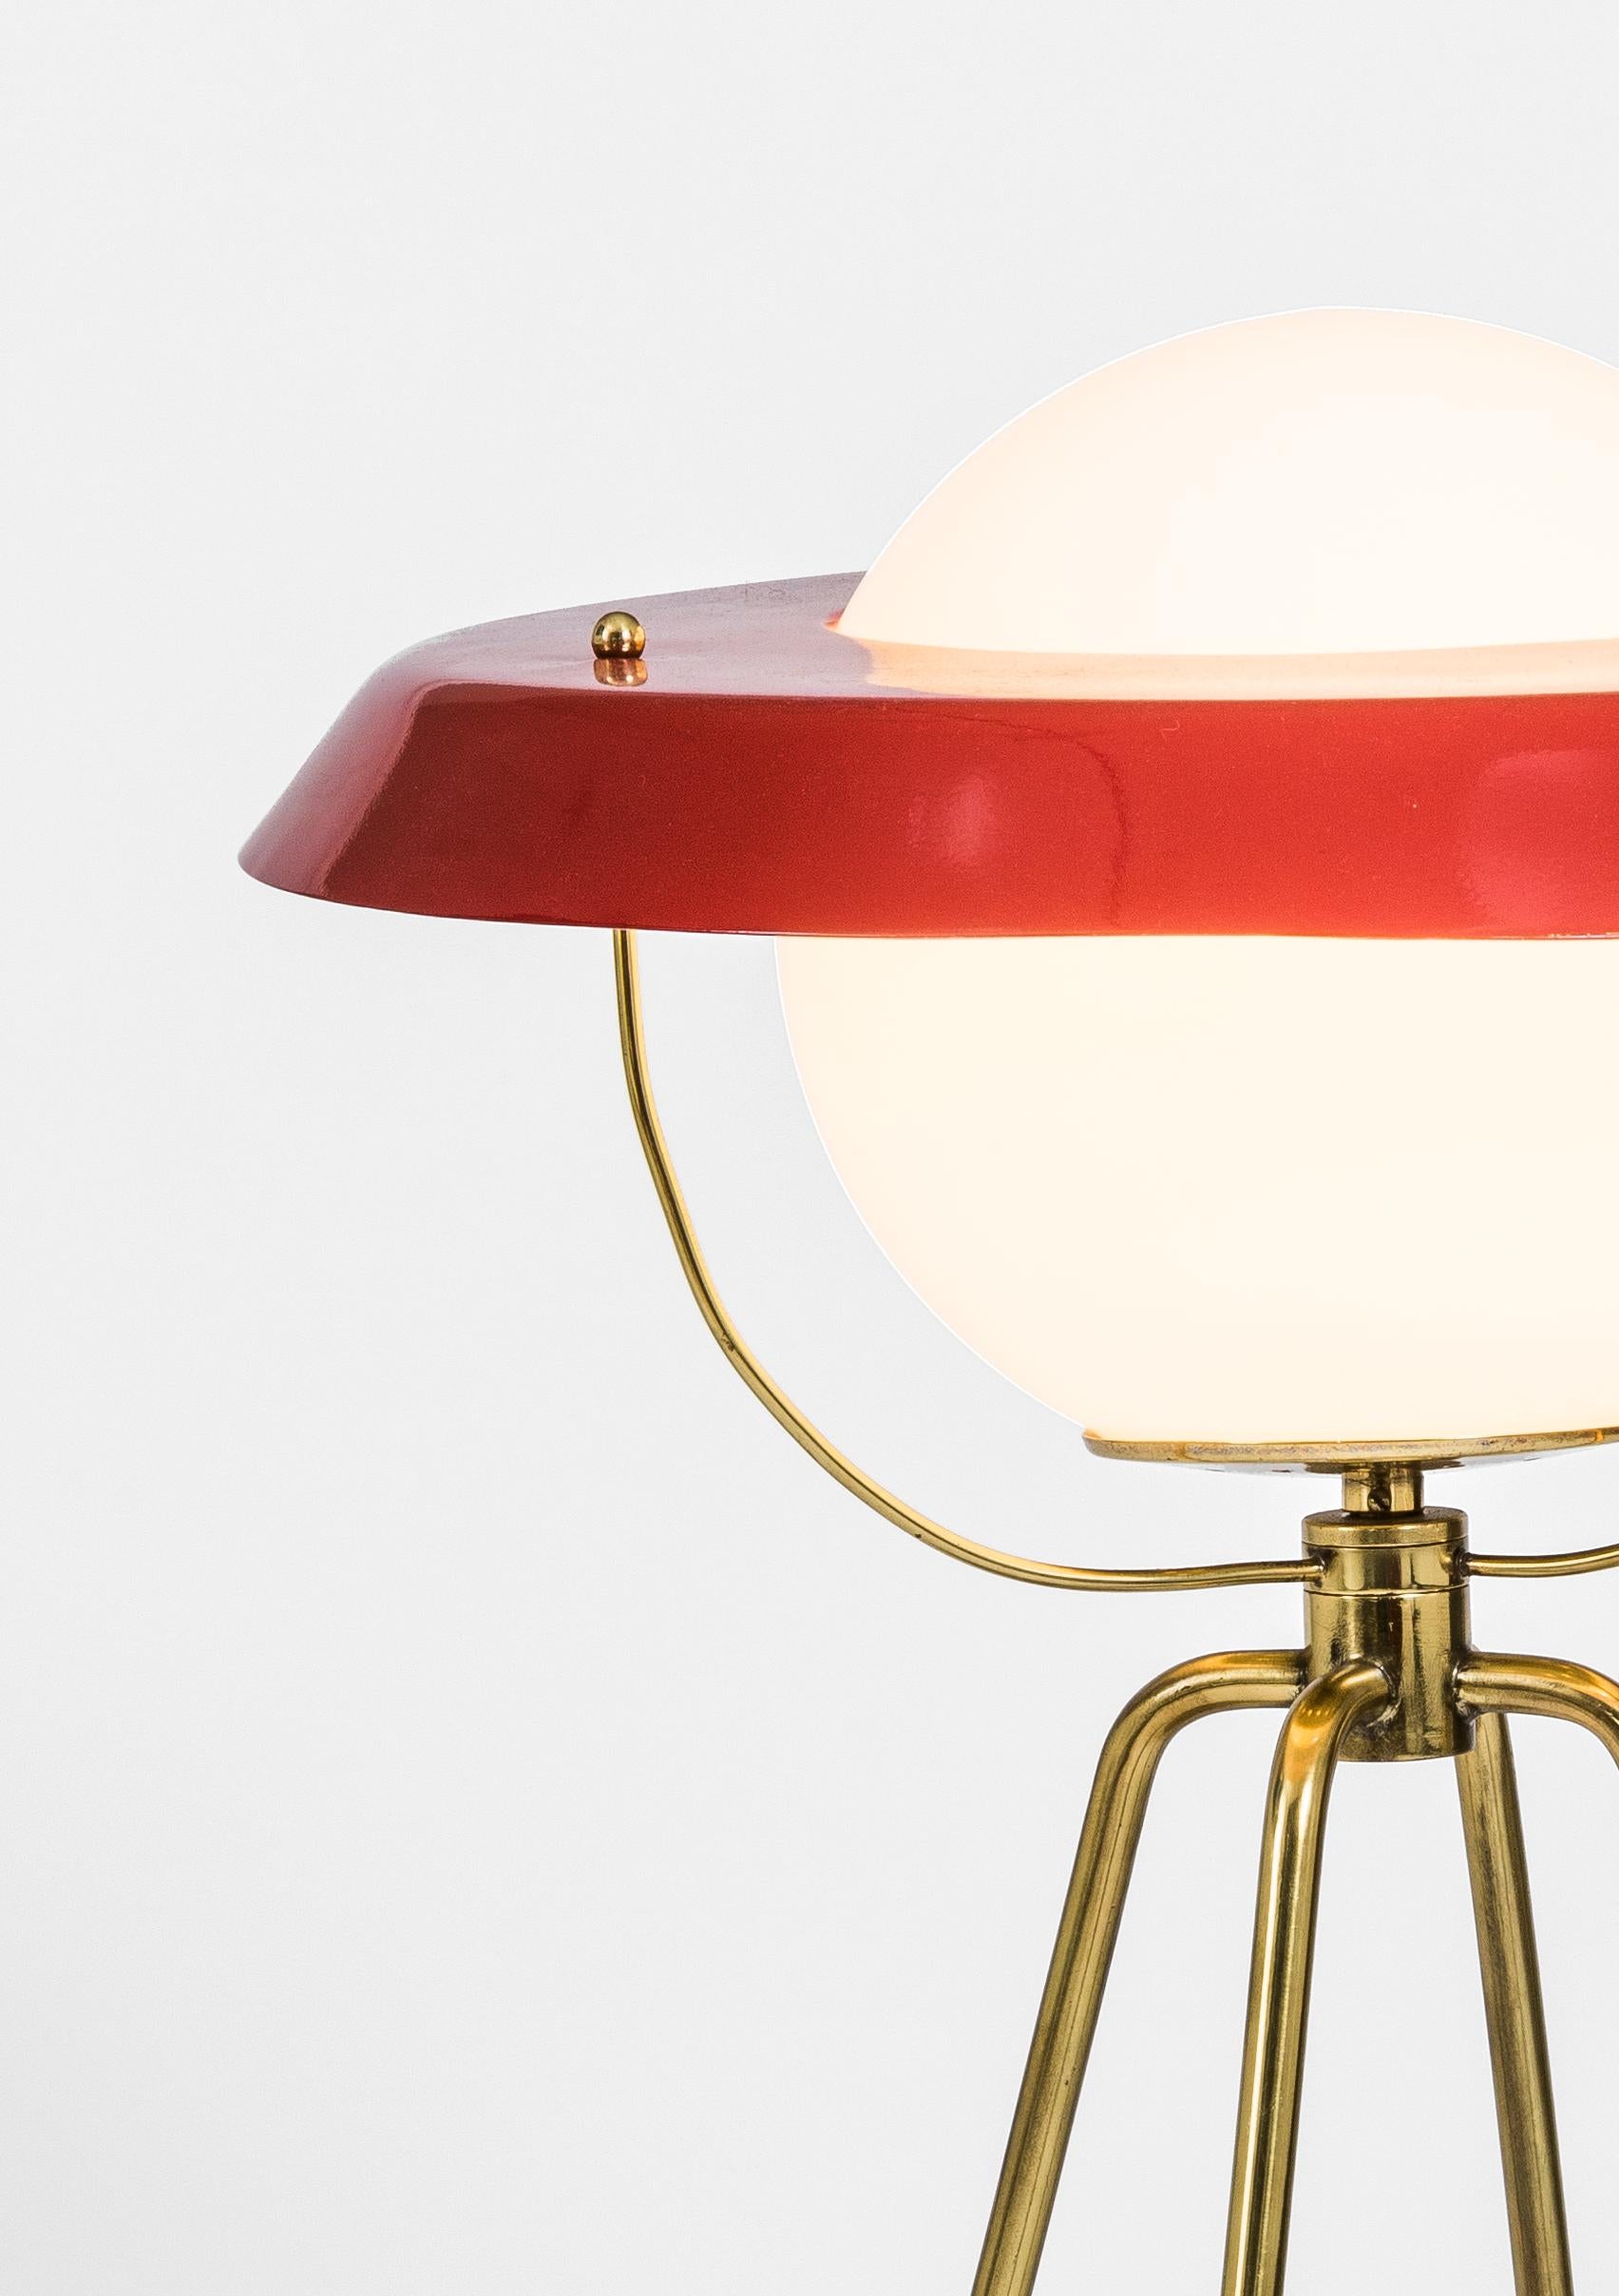 A monumental table or sidebord lamp attributes to Luigi Caccia Dominioni. With all the characteristics of the designer : a disc-shaped lampshade in painted iron on an opaline glass globe, the curved brass tubes and terrazzo. 
The Italian's